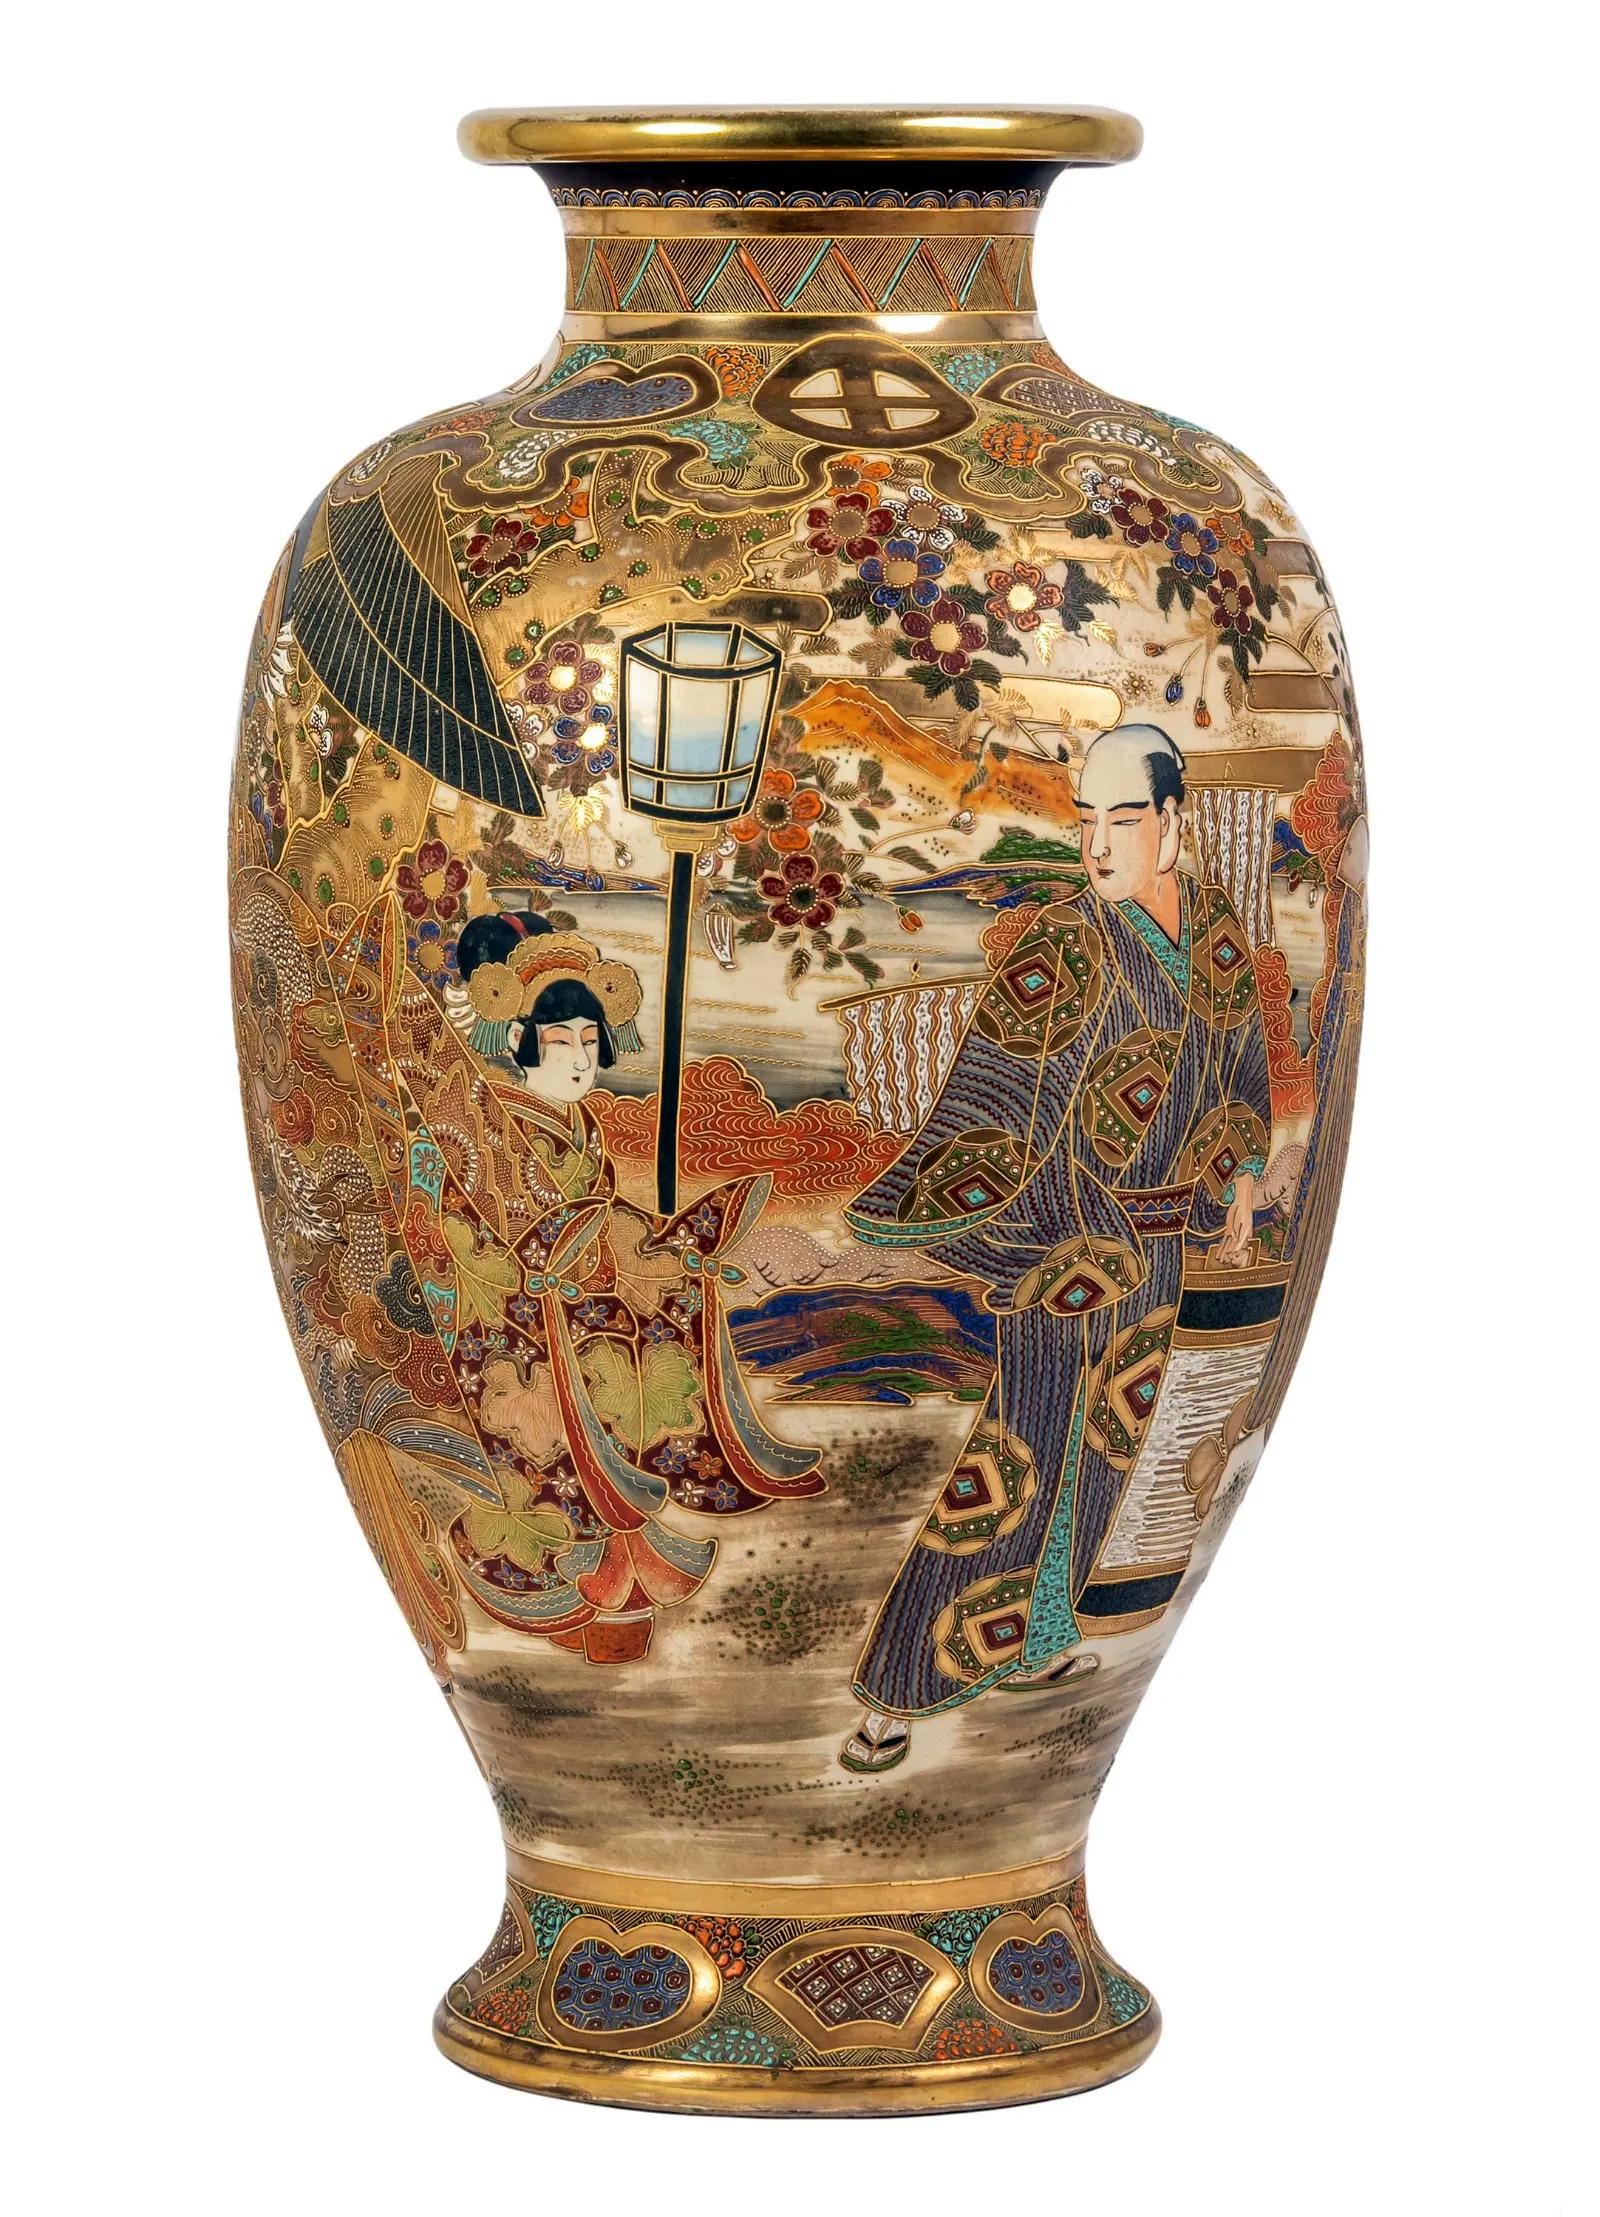 A large Japanese ceramic vase from end of Meiji period circa 1910s by Kinkozan (1645-1927). One of the largest studio manufacturers of the export ceramics at the time based in Kyoto. In the typical style of satsuma made at the turn of 20th century,